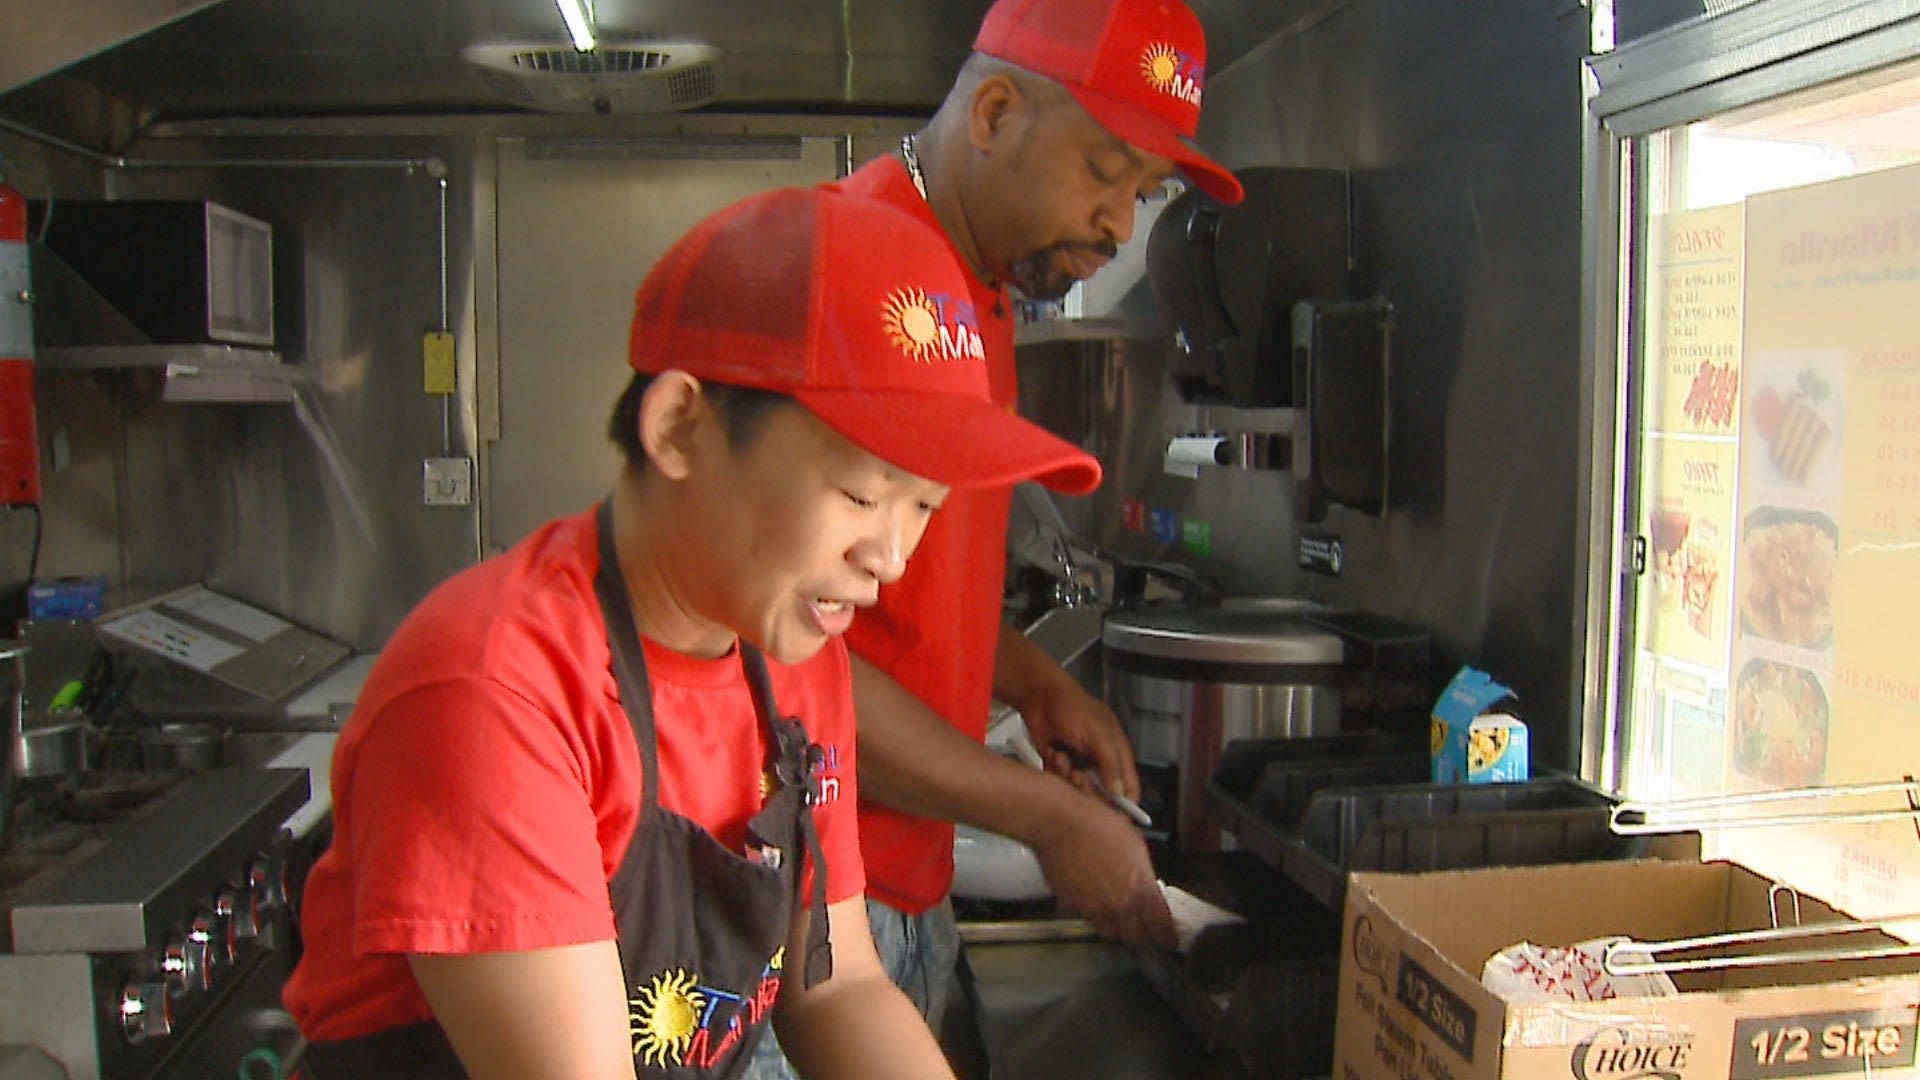 Filipino food truck 'brings a little piece of Philippines to Indy'